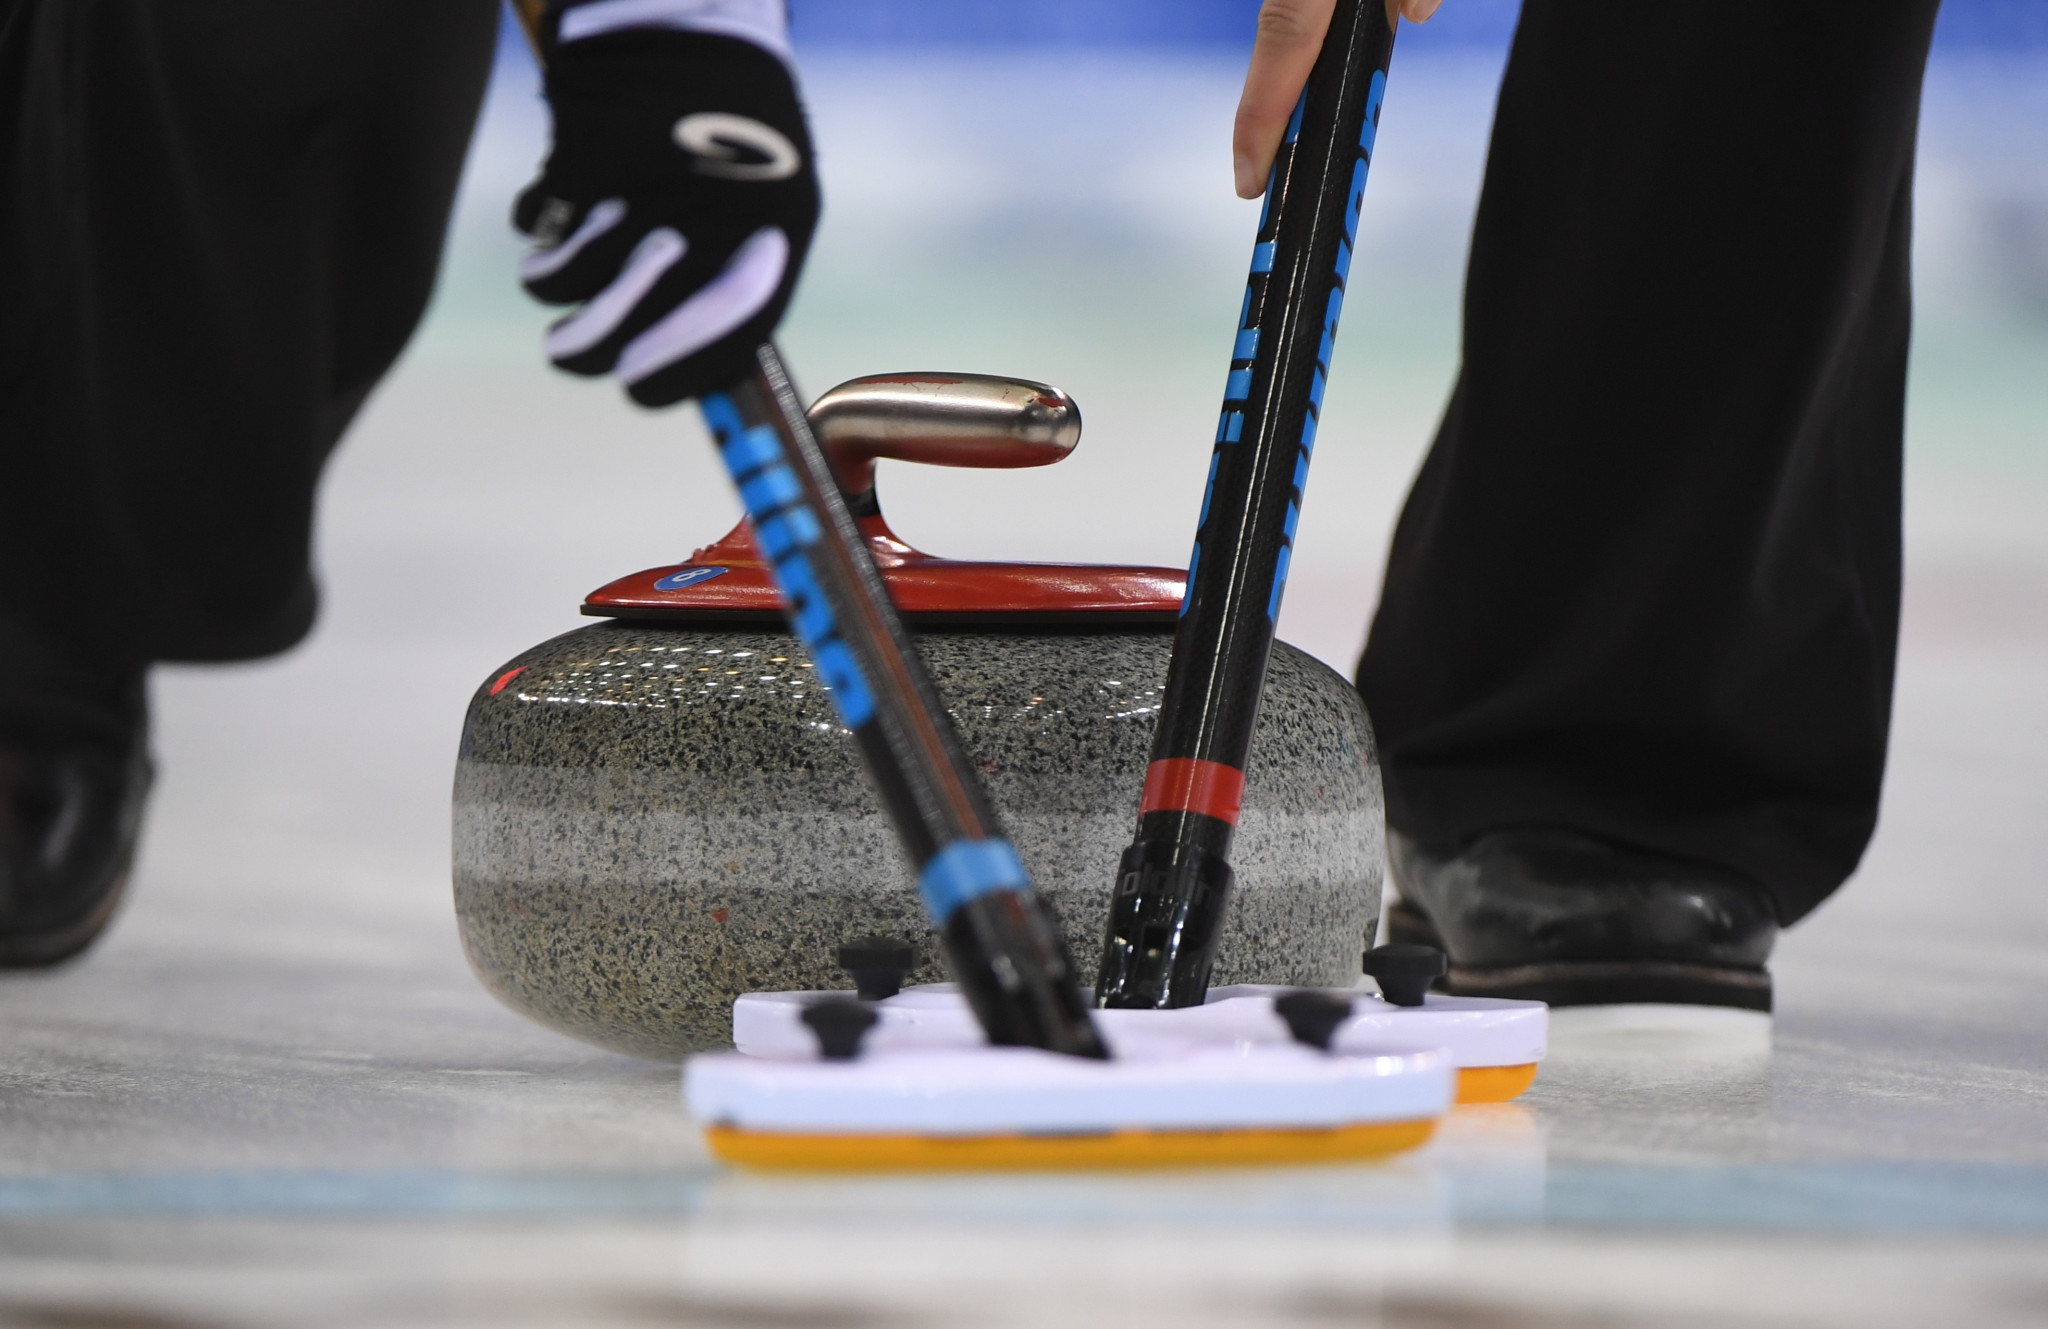 The World Curling Federation has partnered with V-ZUG for the next three non-Canadian World Championships ©Getty Images